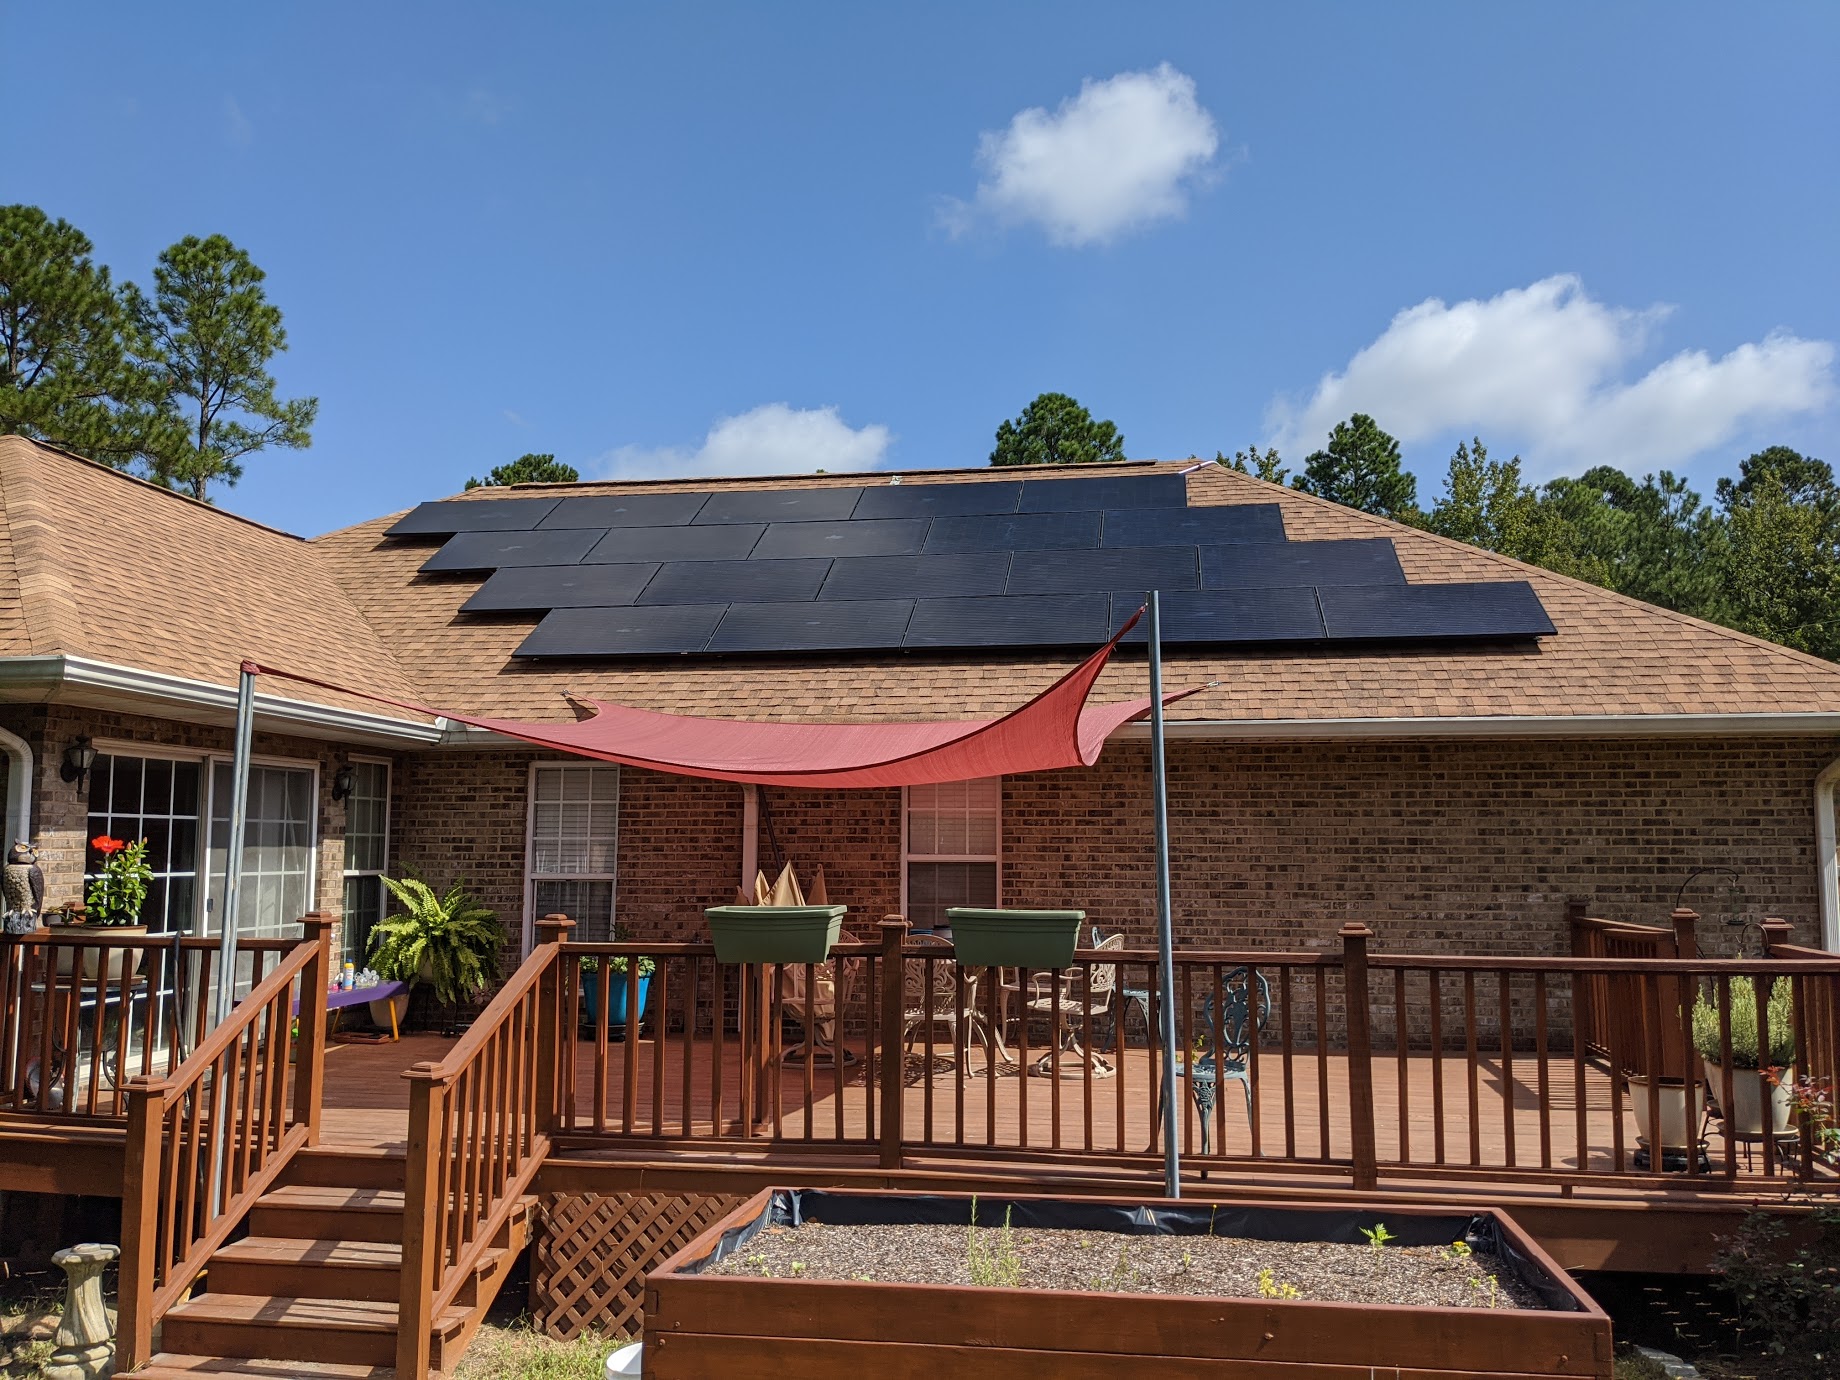 Another large grid tie with battery backup system in Hawkinsville, Georgia.